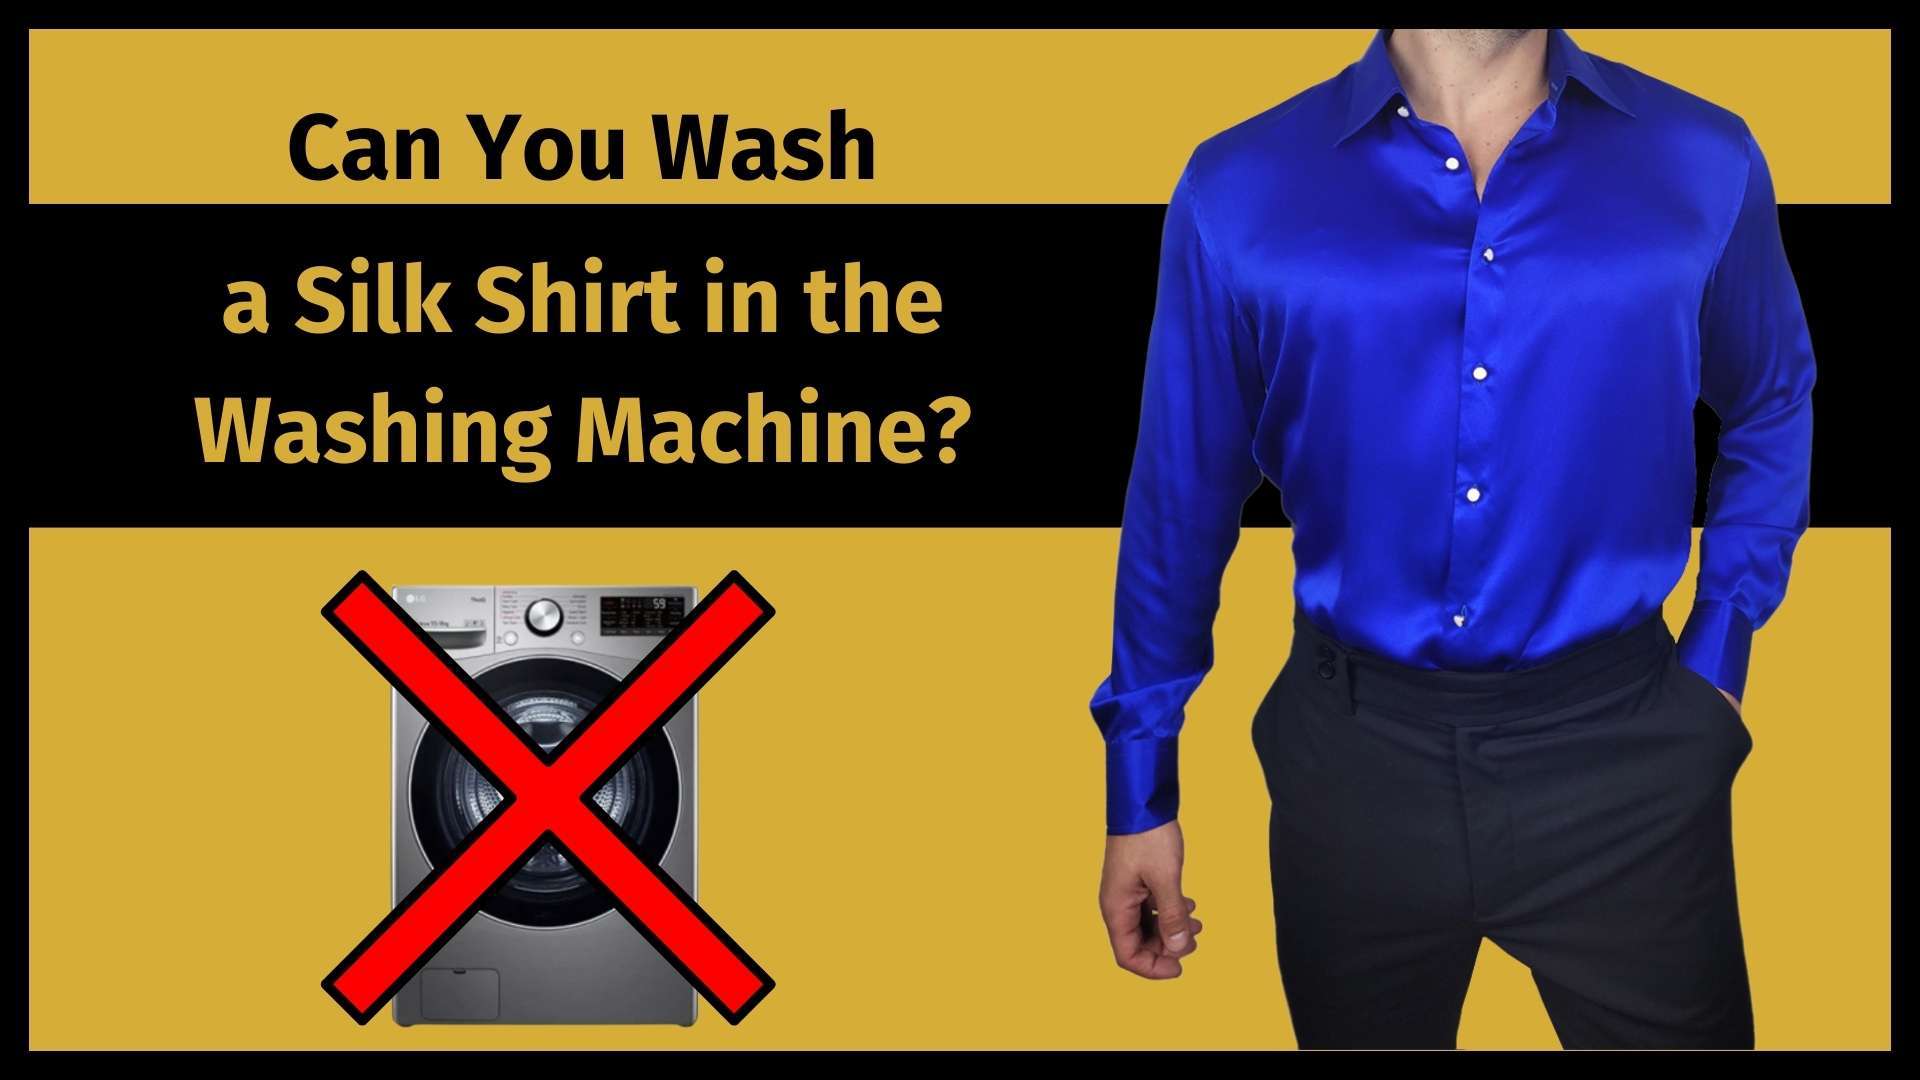 can you wash a silk shirt in the washing machine banner image with a man wearing a blue silk shirt and an X overtop of a washing machine